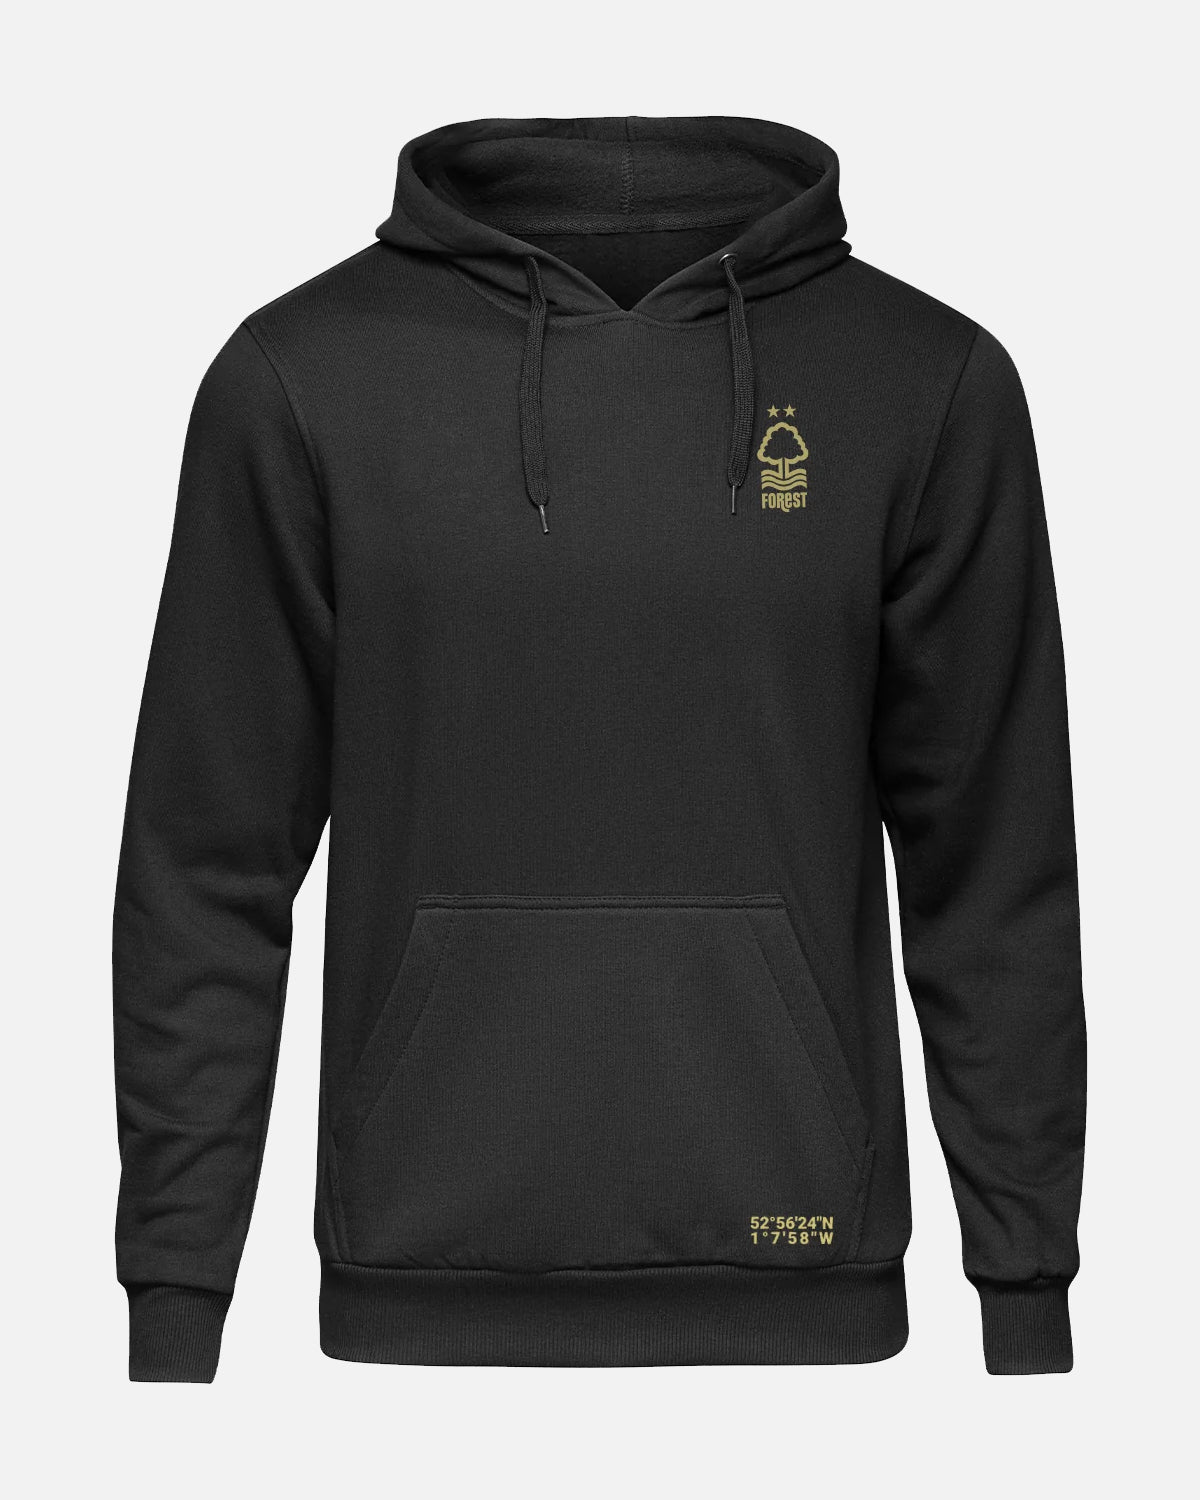 NFFC Heritage Co-ordinates Hoodie - Nottingham Forest FC